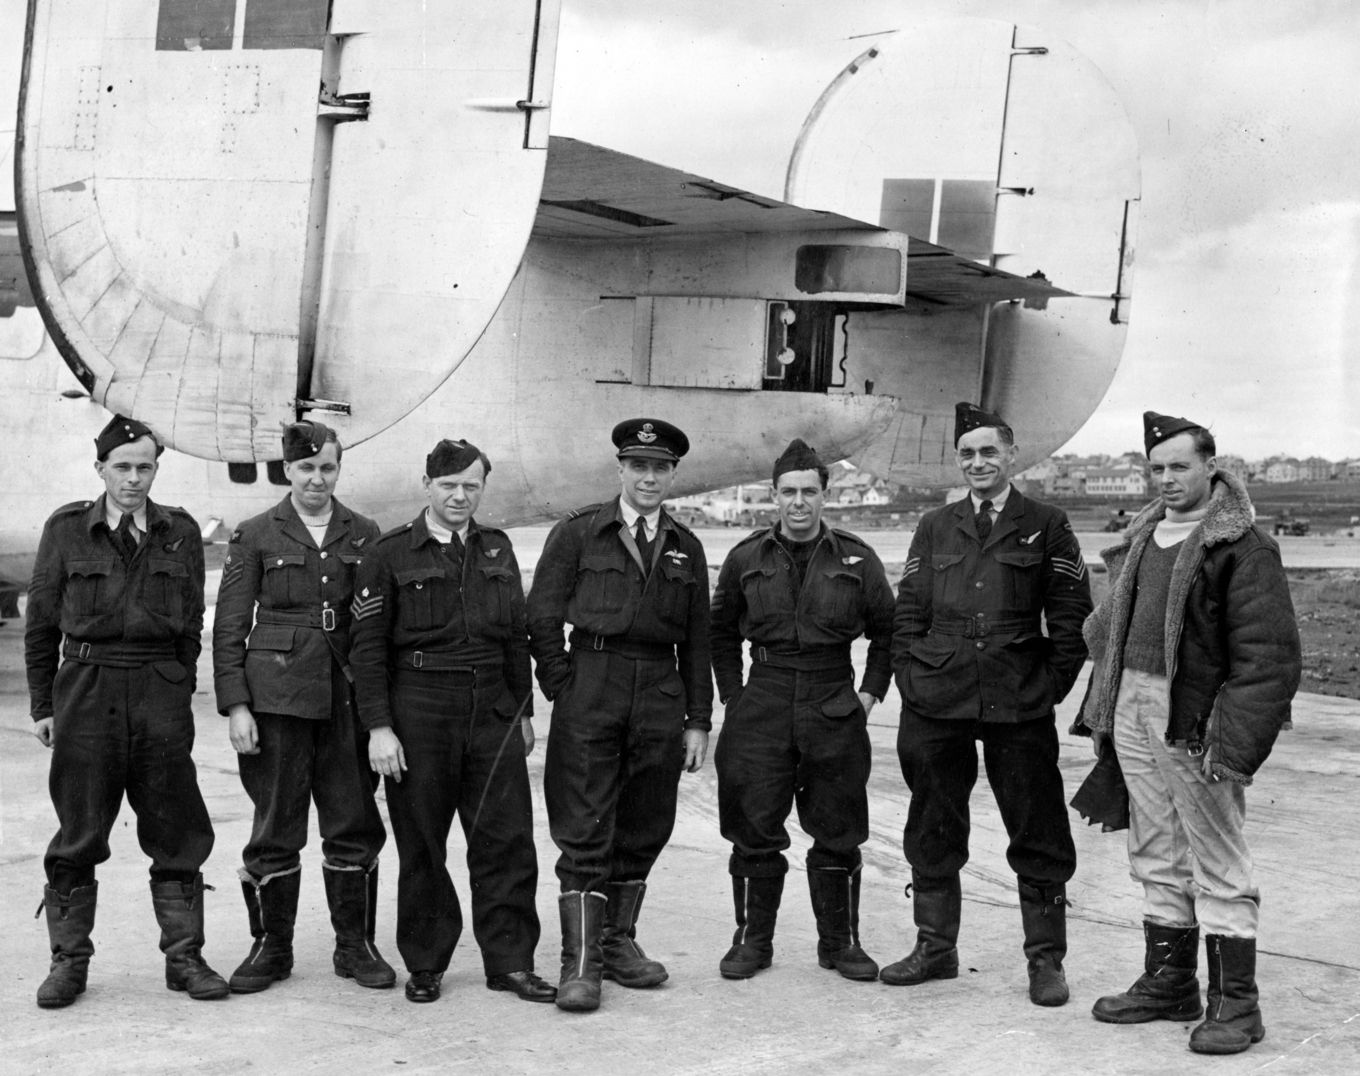 image shows a black and white photo of some of 120 Squadron from 1943.